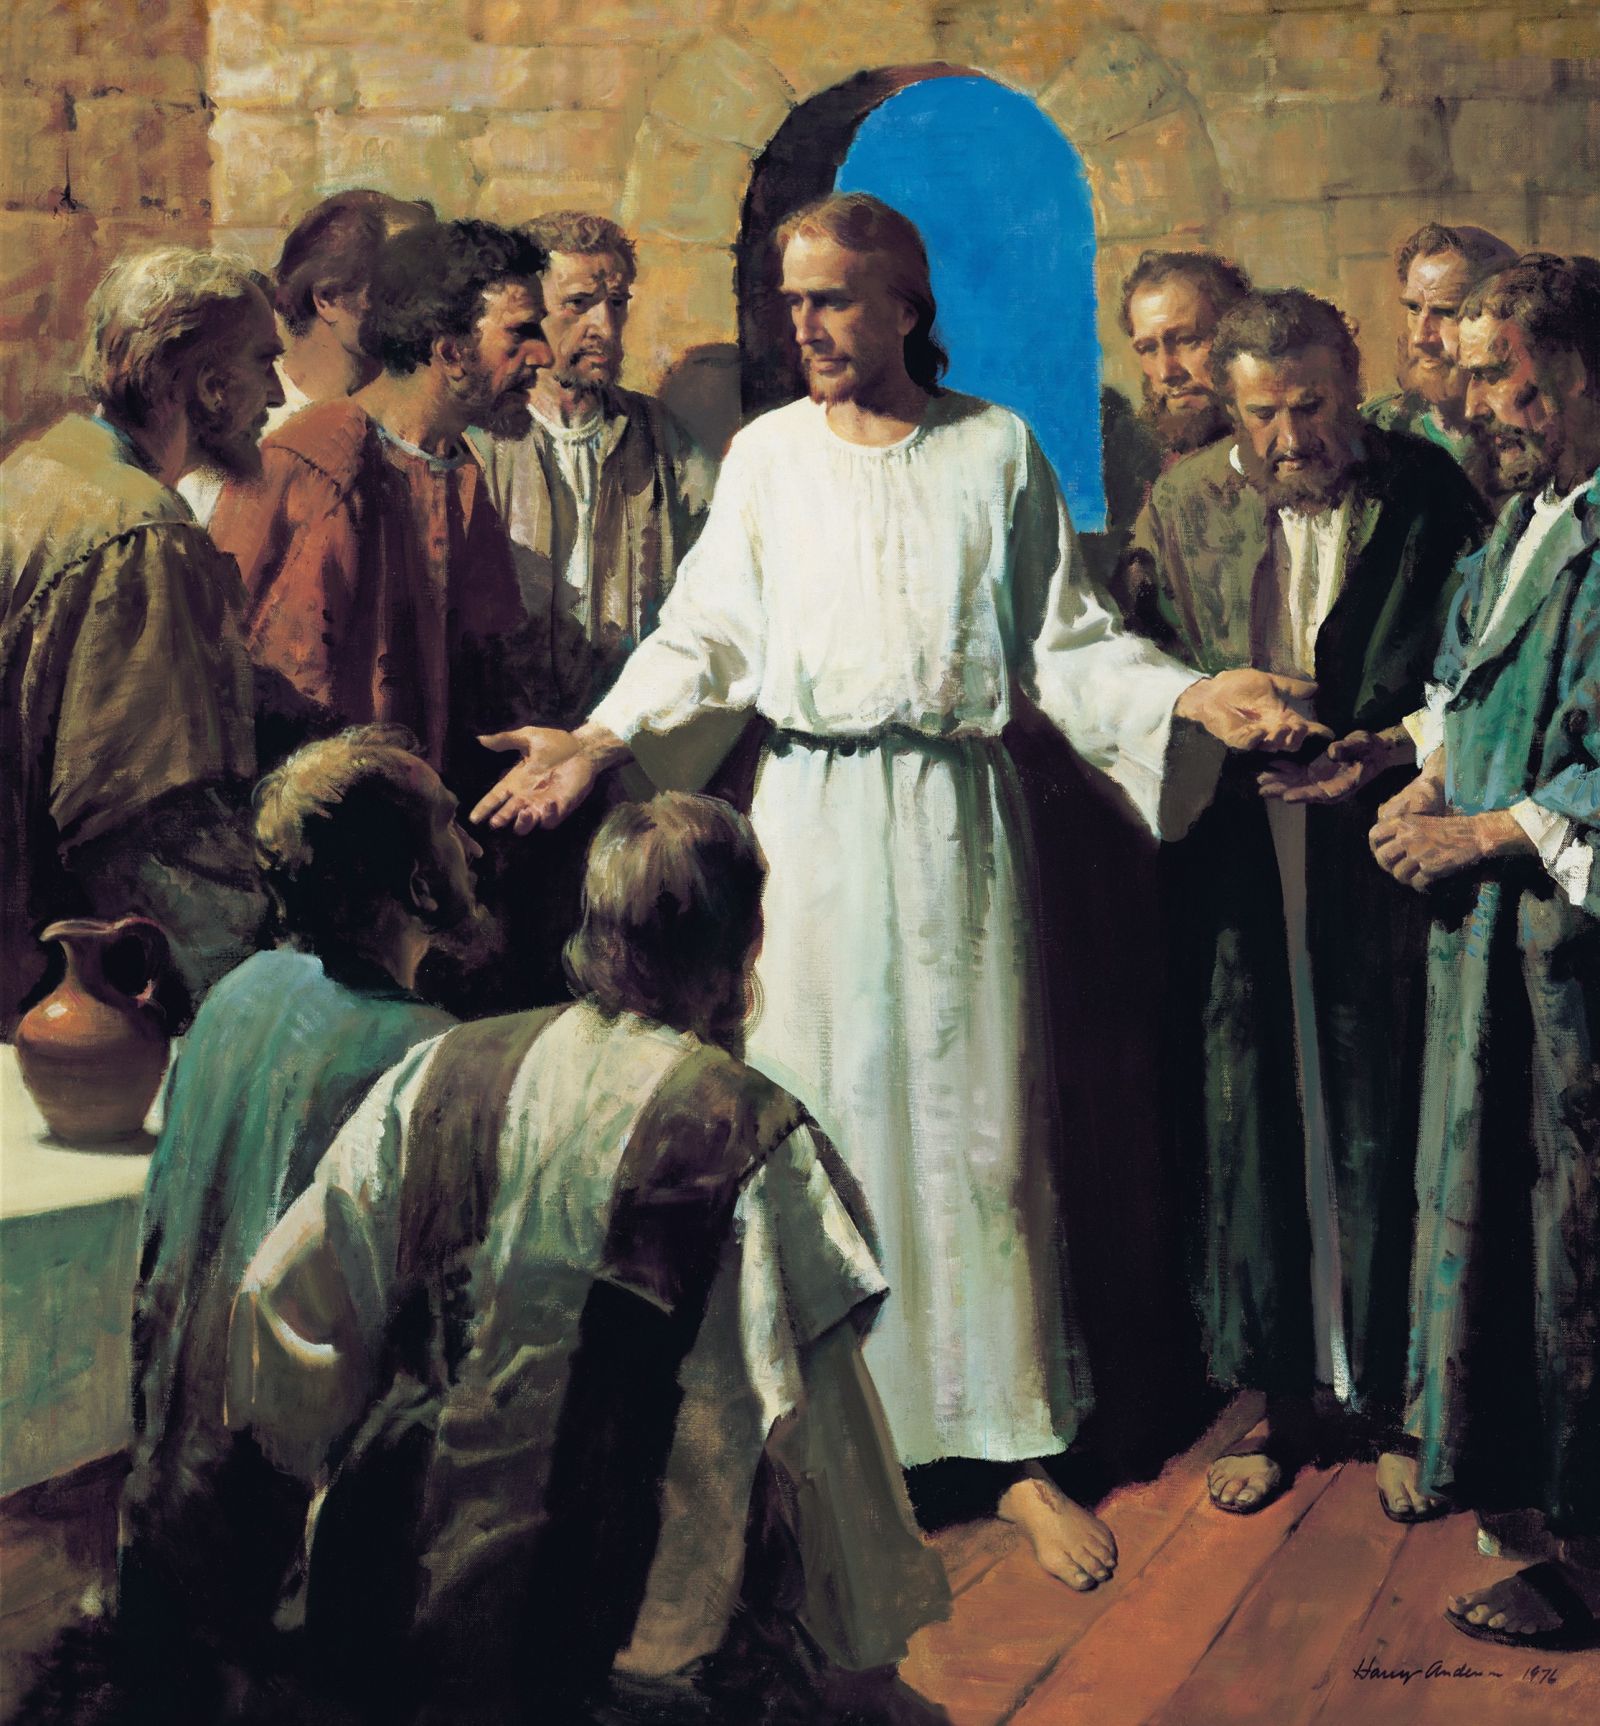 'Jesus Shows His Wounds (Behold My Hands and Feet)' by Harry Anderson